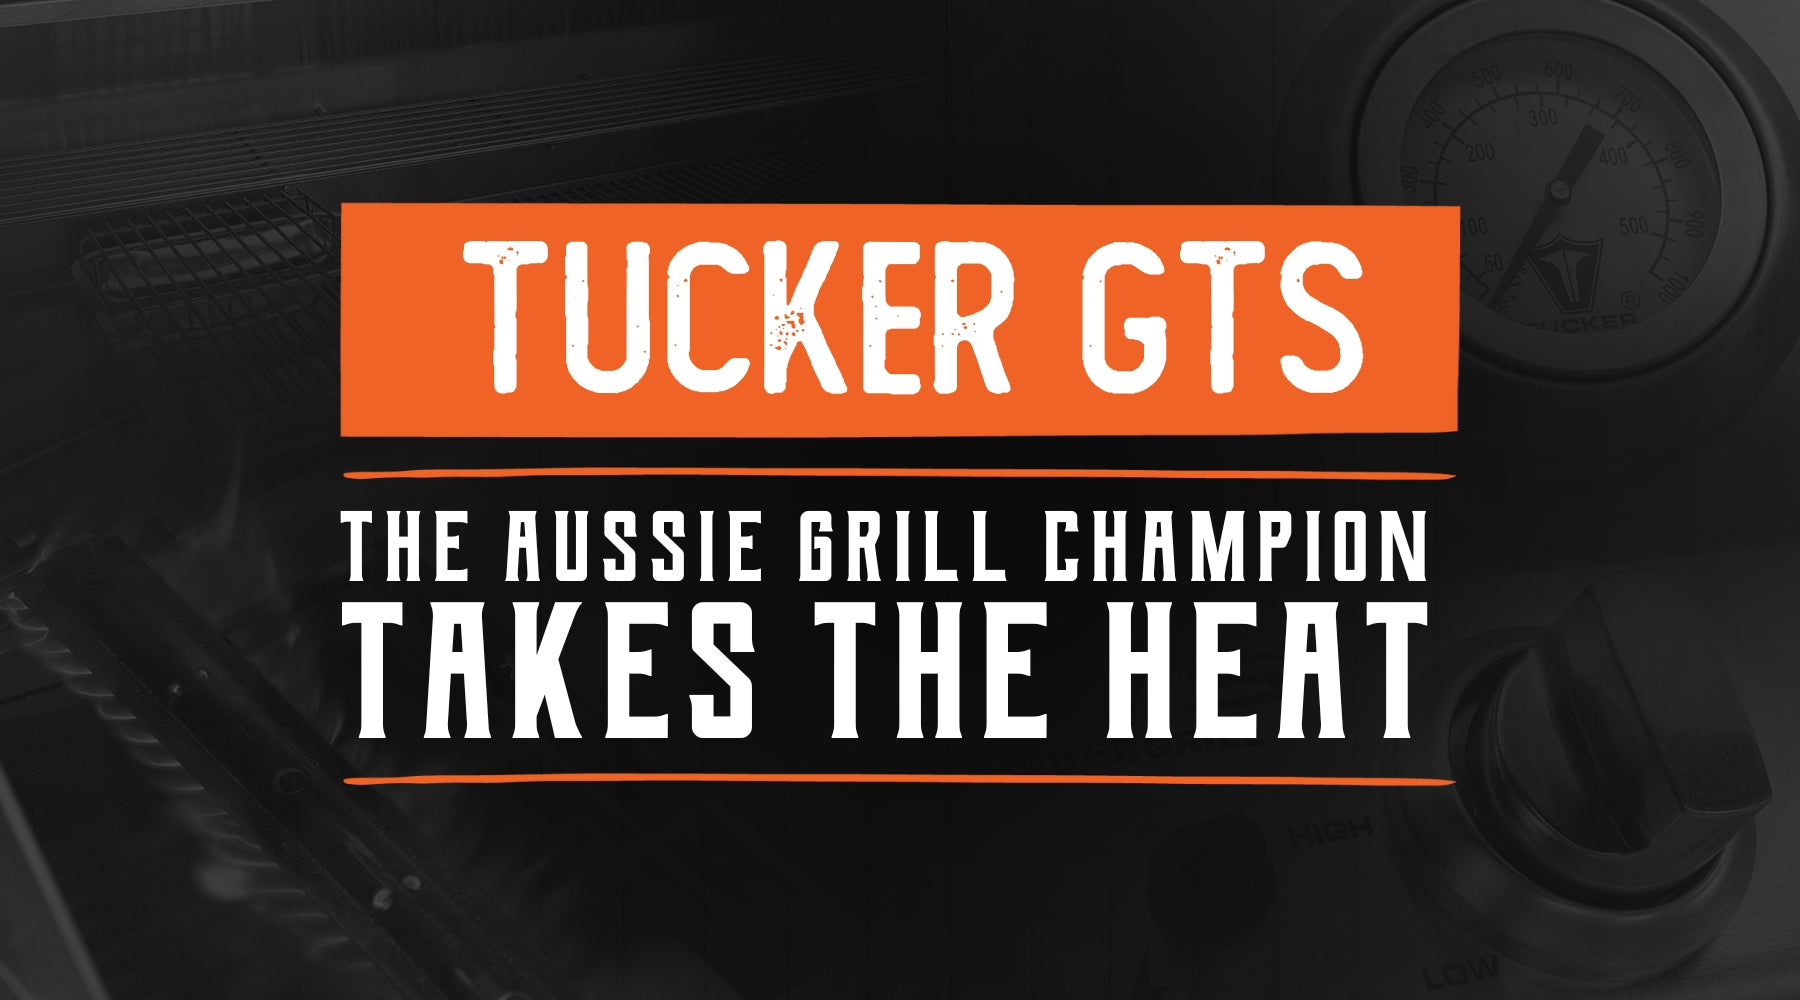 Tucker GTS - The Aussie Grill Champion Takes the Heat